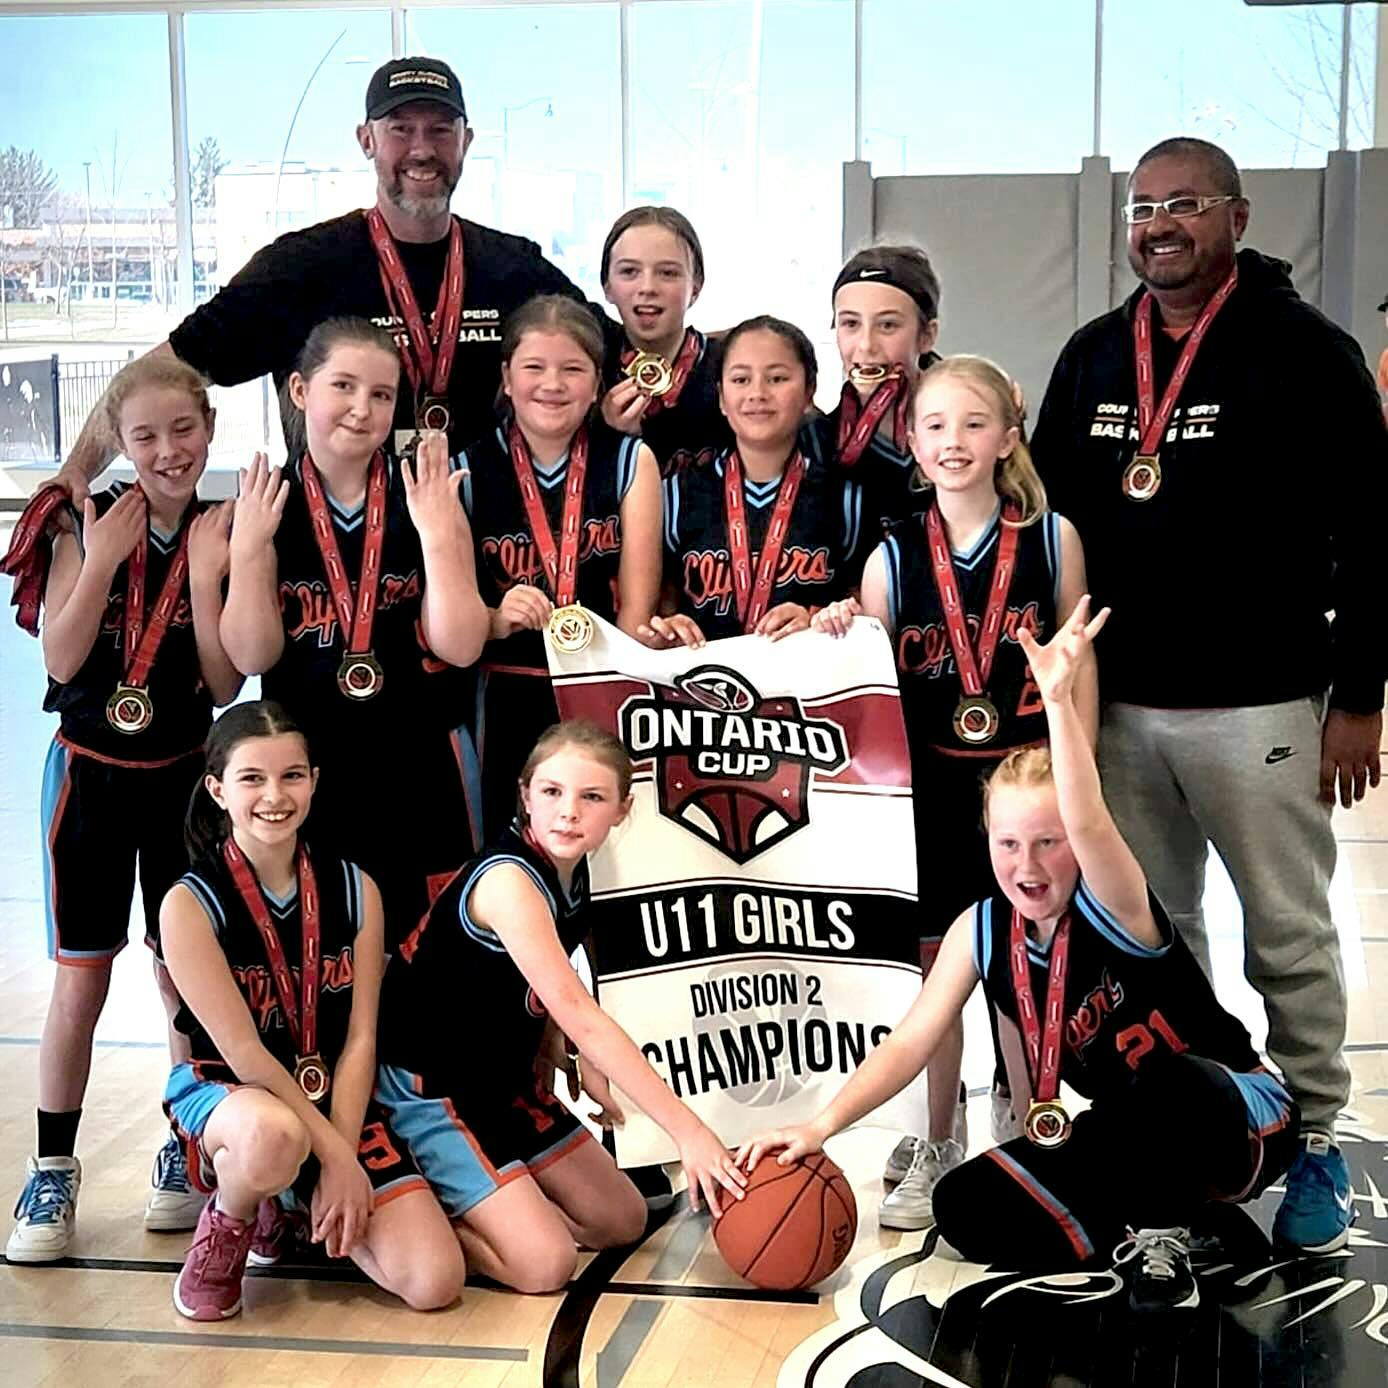 <p>The U11 County Clippers are Ontario Cup Division 2 champions. The club, coached by (left) Drew Wollenberg and (right) Hiten Lad, include Lilja Schaer,  Nora Vader,<br />
Norah Lad,  Emma Wiersma,  Avery Carlone,<br />
June Wollenberg, Mckayla Smyth, Quinn Heintzman-Mountenay,<br />
Vanessa Bond, Stella Coleman as well as affiliated players (not pictured) Lola Hart and Elle Kopp. (Submitted Photo).</p>
